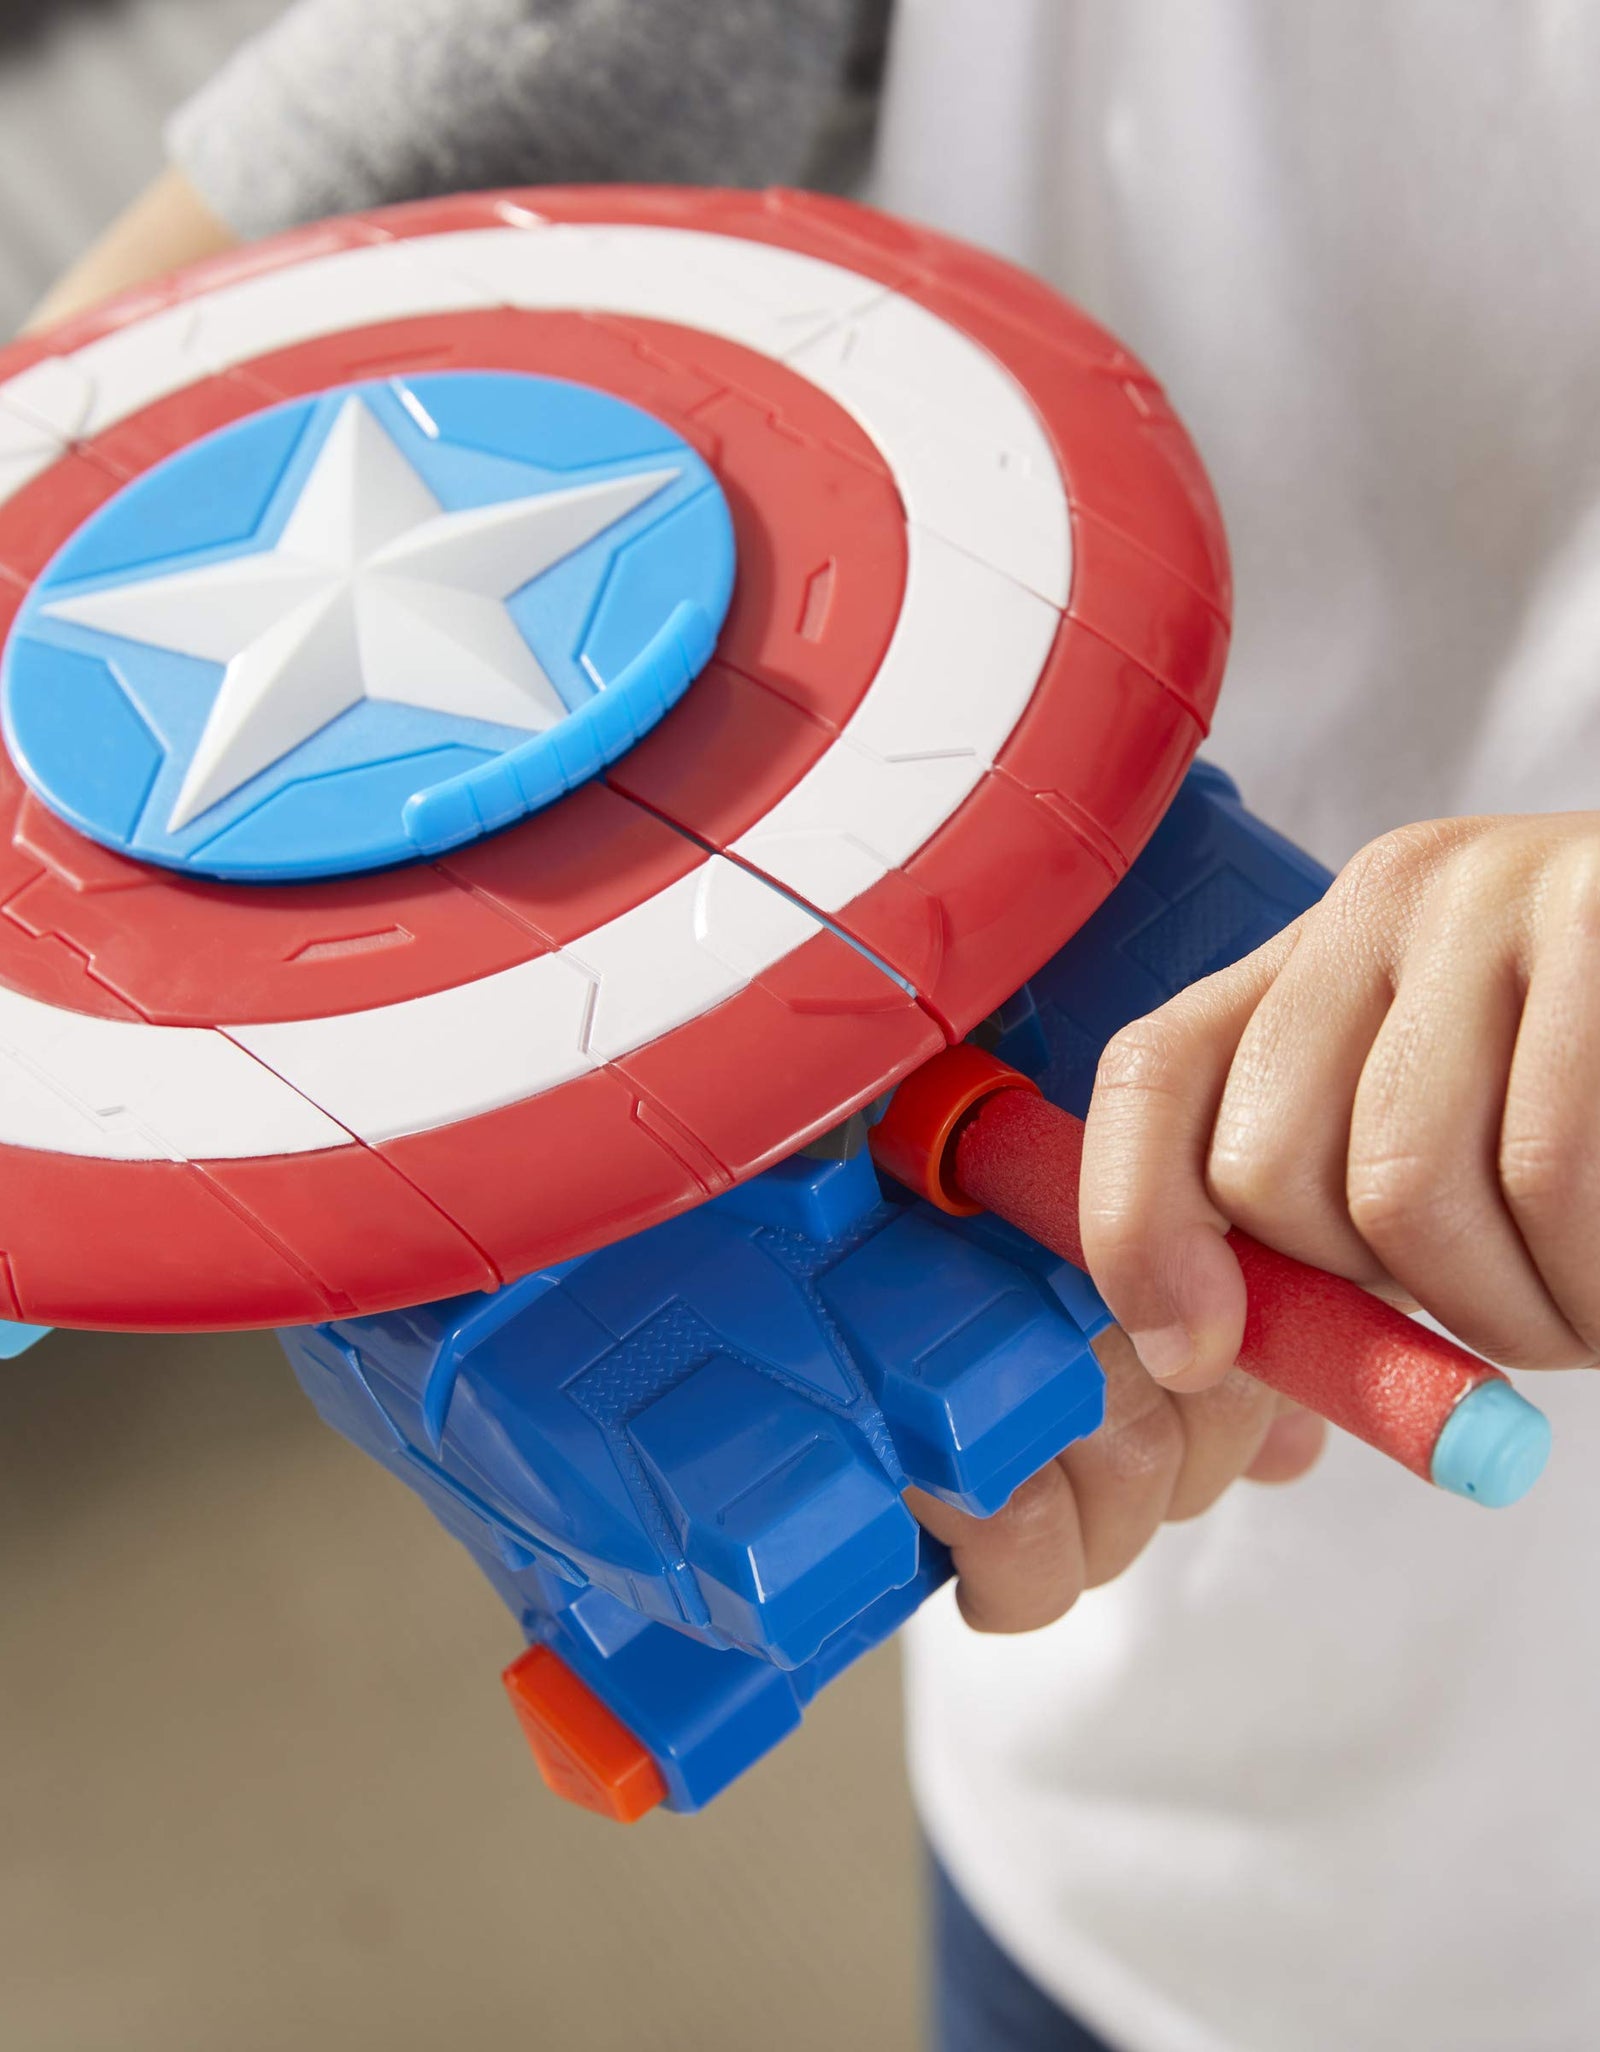 Avengers Hasbro Marvel Mech Strike Captain America Strikeshot Shield Role Play Toy with 3 NERF Darts, Pull Handle to Expand, for Kids Ages 5 and Up